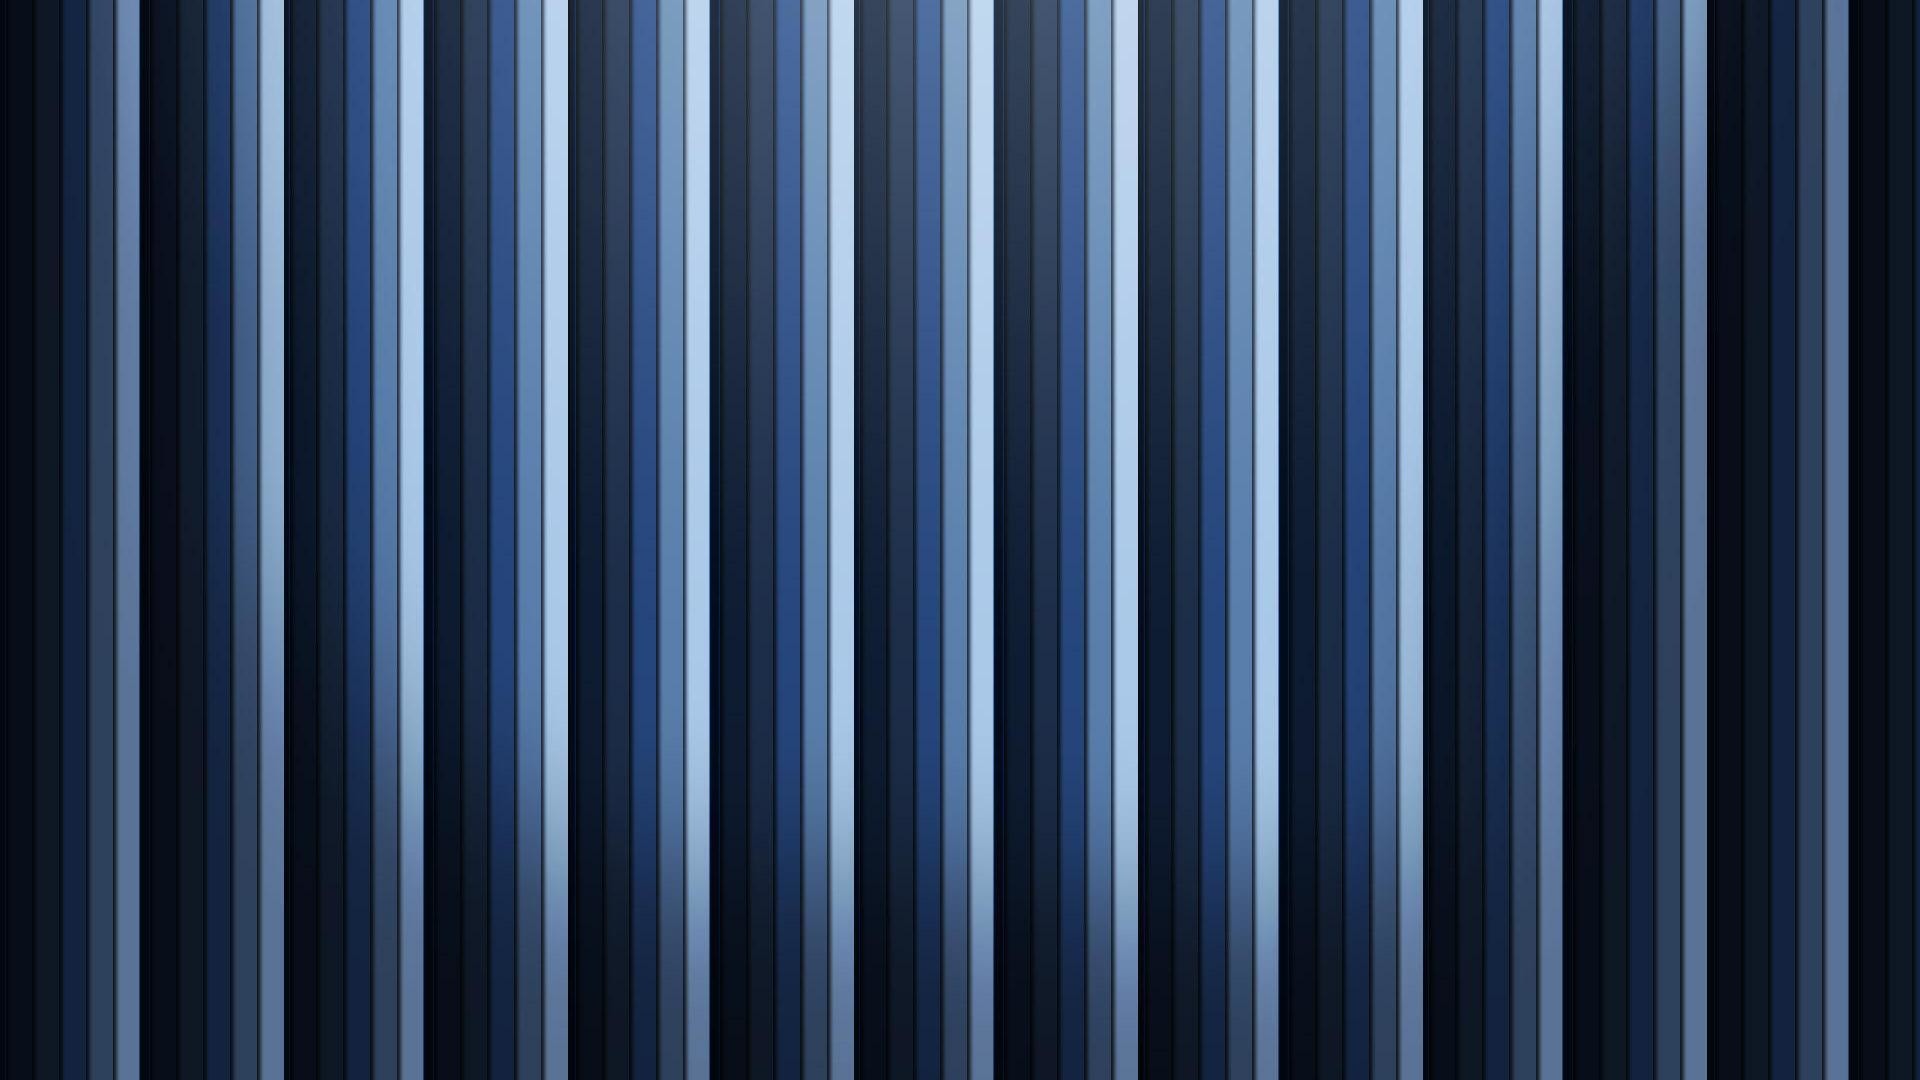 Black and Blue Striped Wallpaper